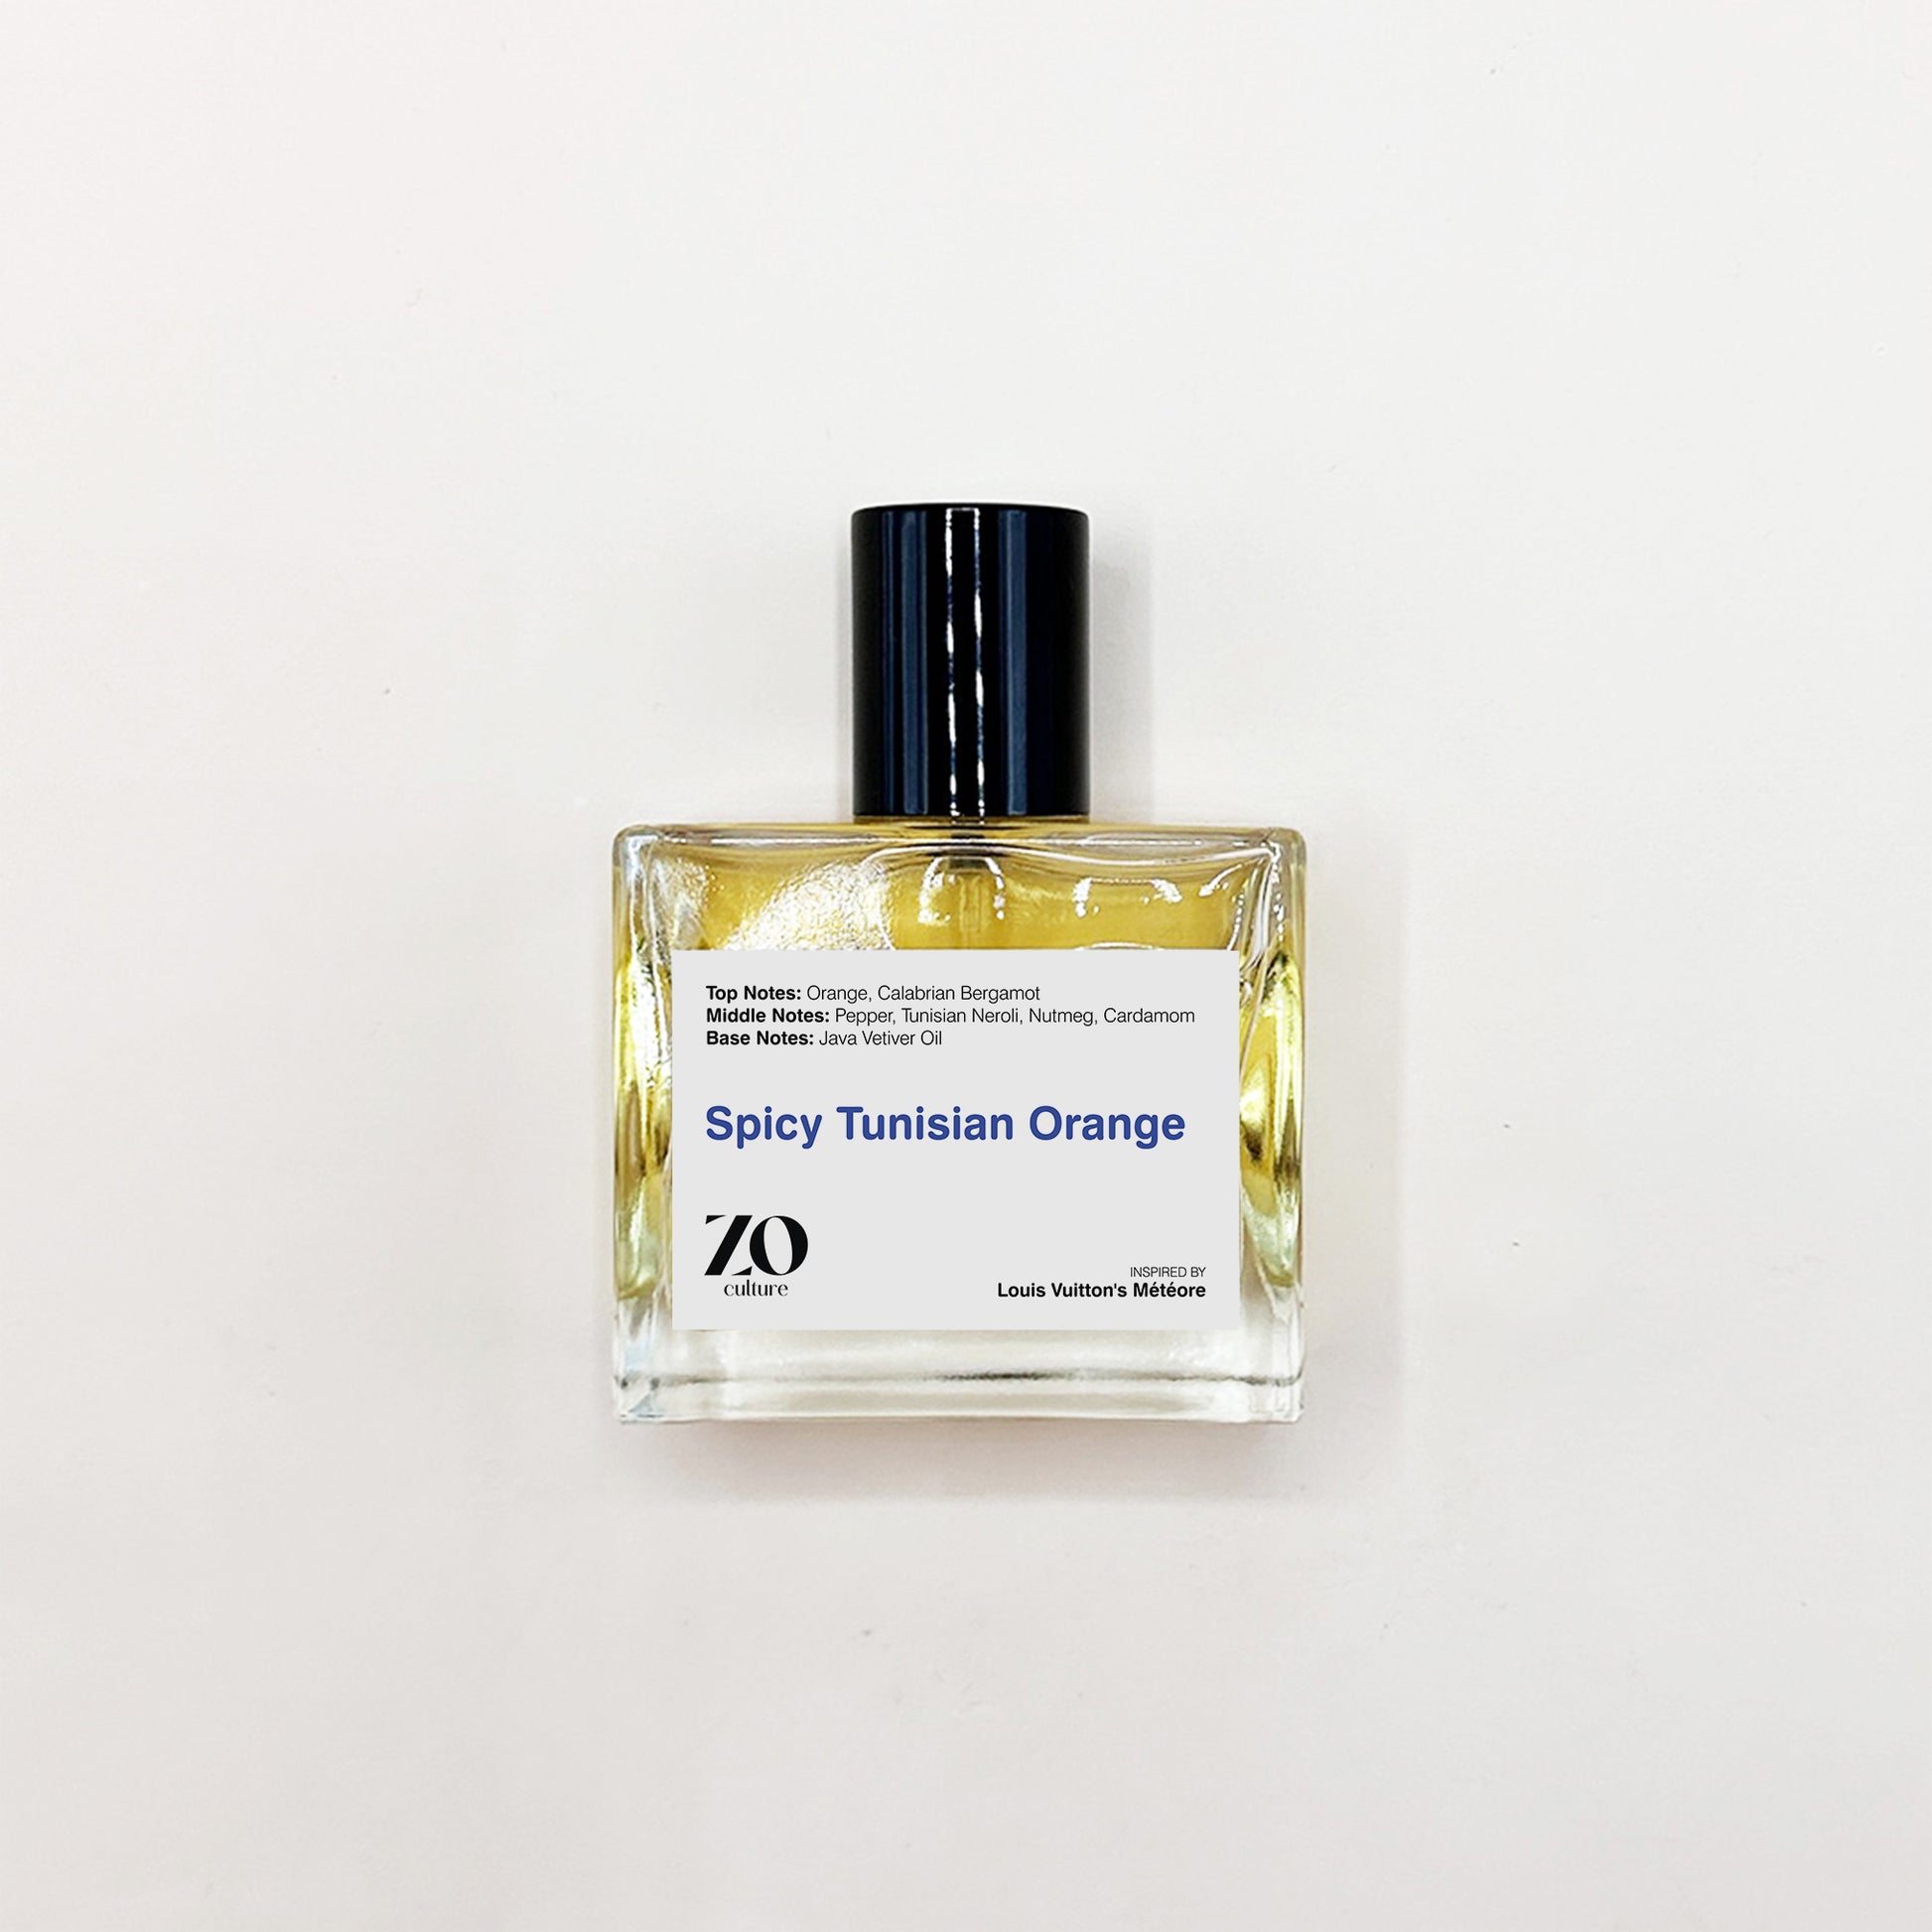 Men Perfume Spicy Tunisian Orange - Inspired by LV's Météore ZoCulture